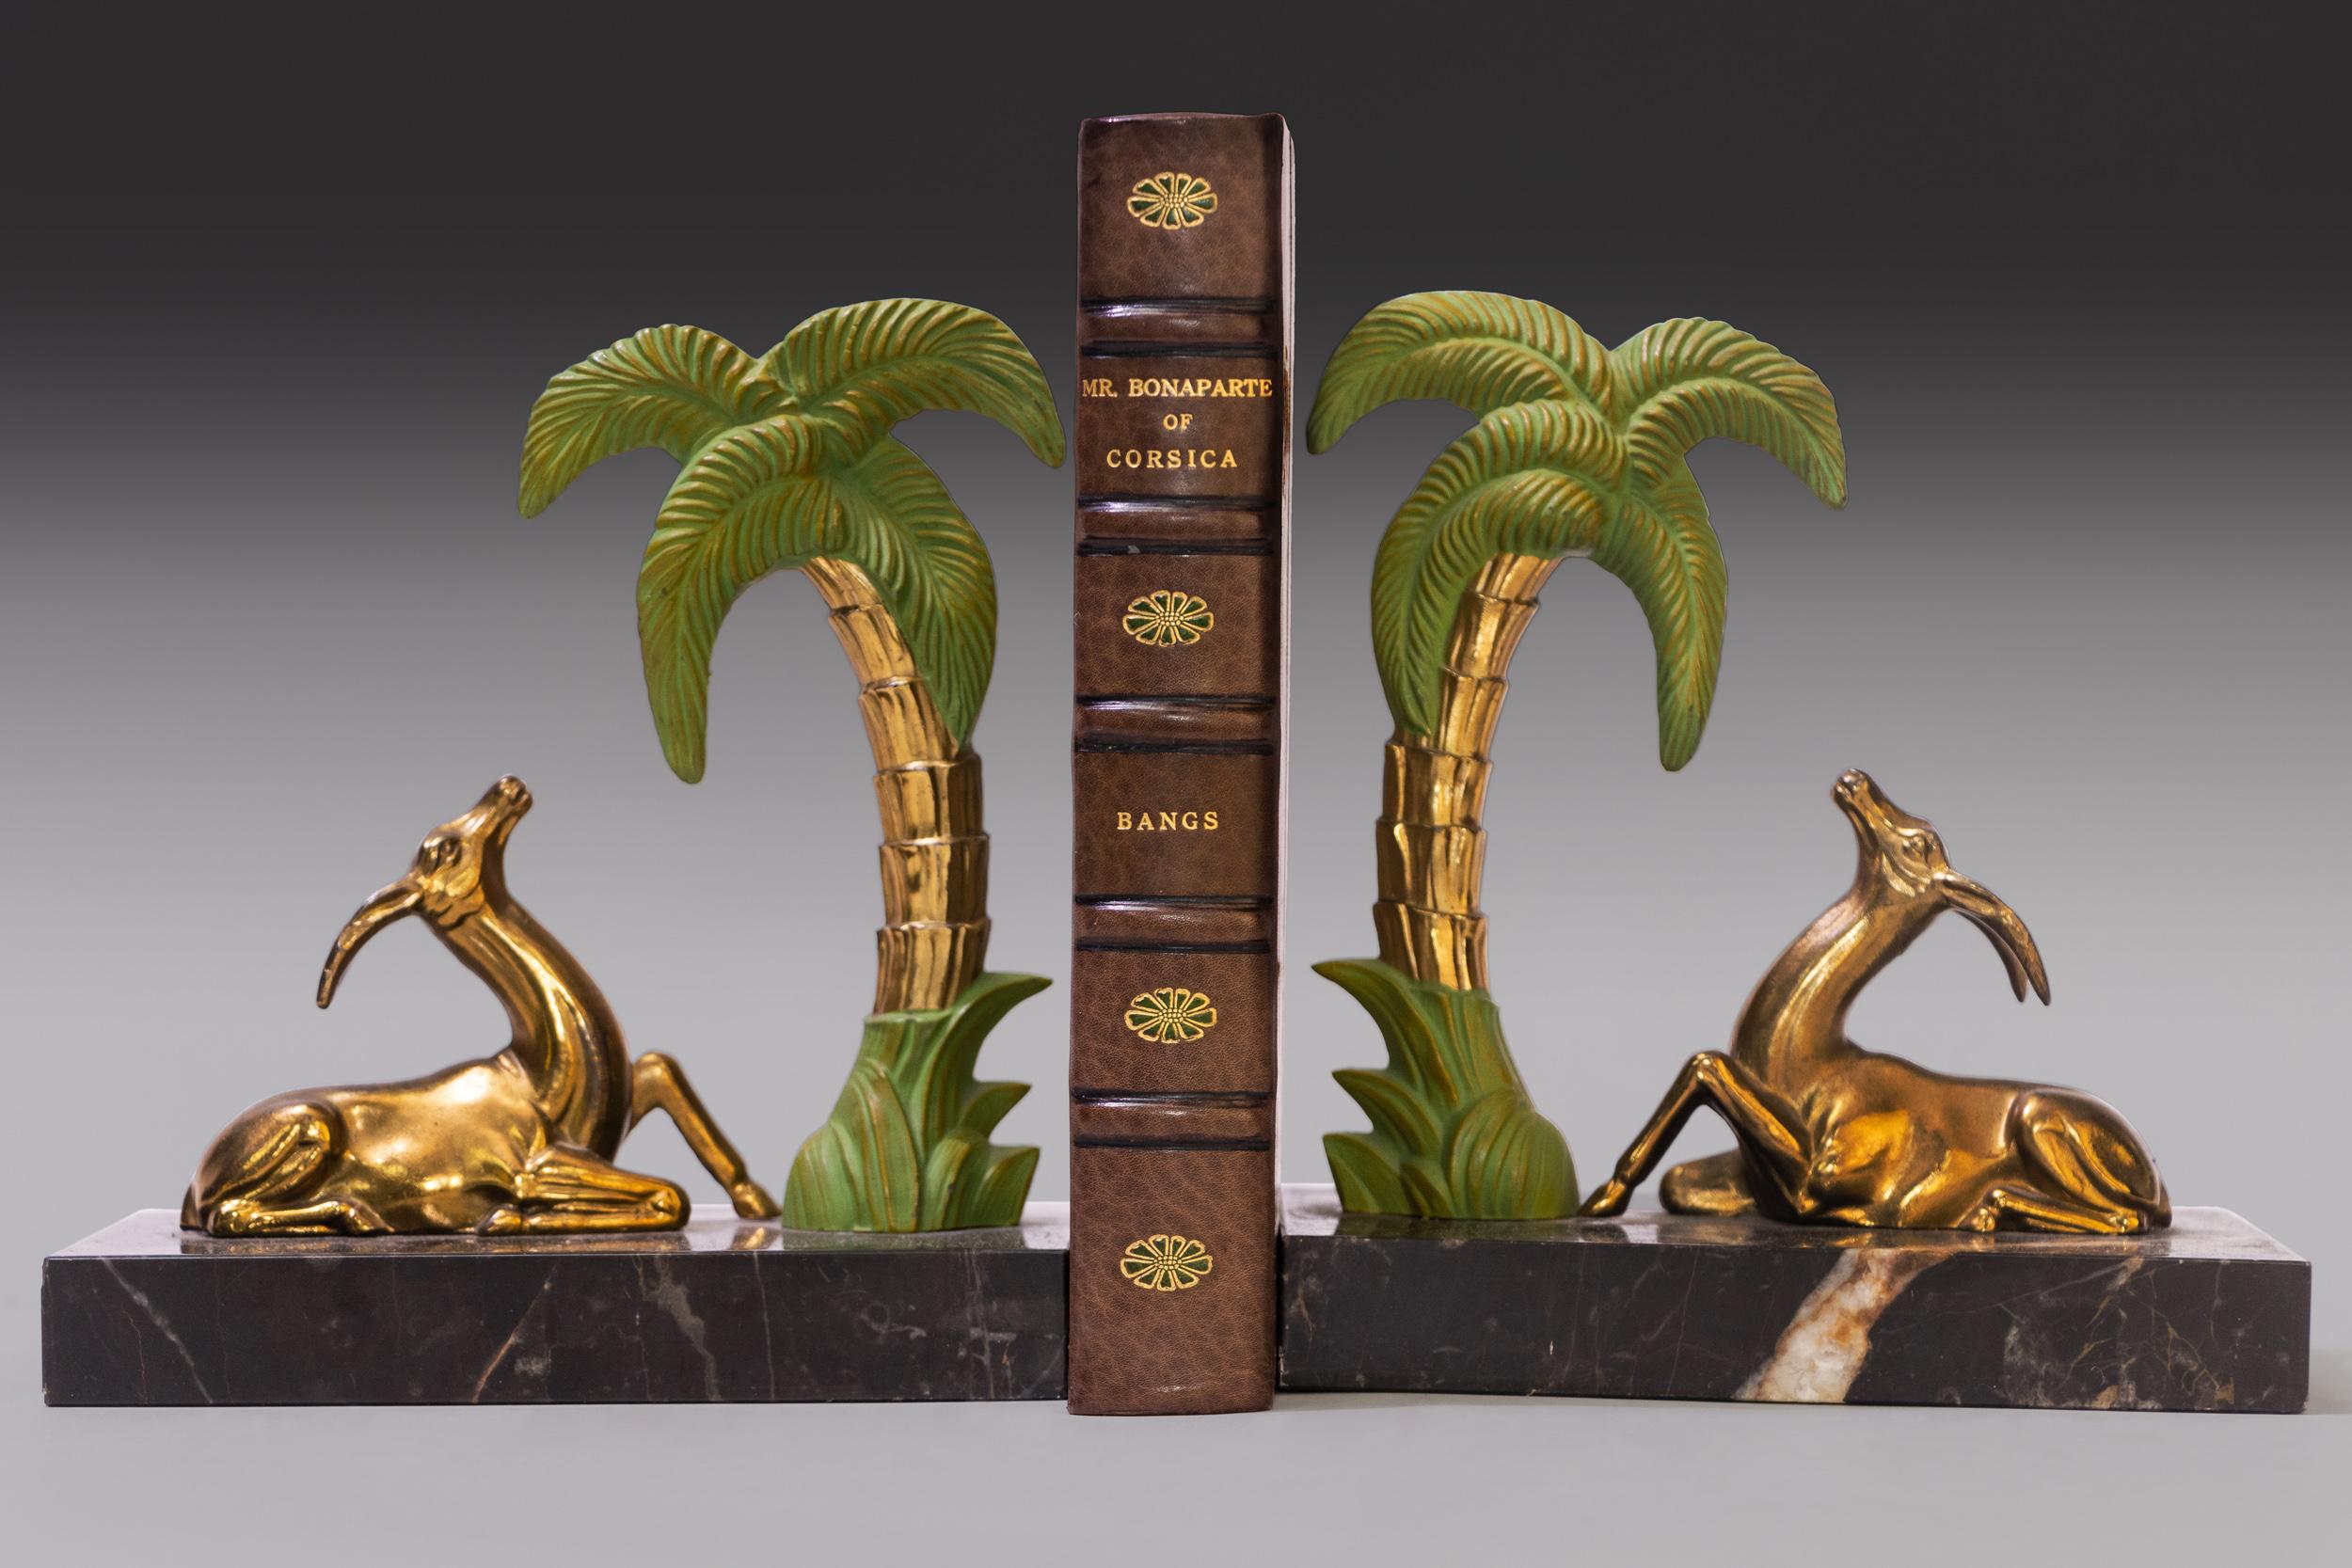 1 Volume. John Kendrick Bangs, Mr. Bonaparte of Corsica. Bound in 3/4 brown morocco. Linen boards. Raised bands. Top edges gilt. Gilt emblem on front cover. Illustrated by H.W. McVickar. Published: New York; Harper & Brothers Publishers 1895